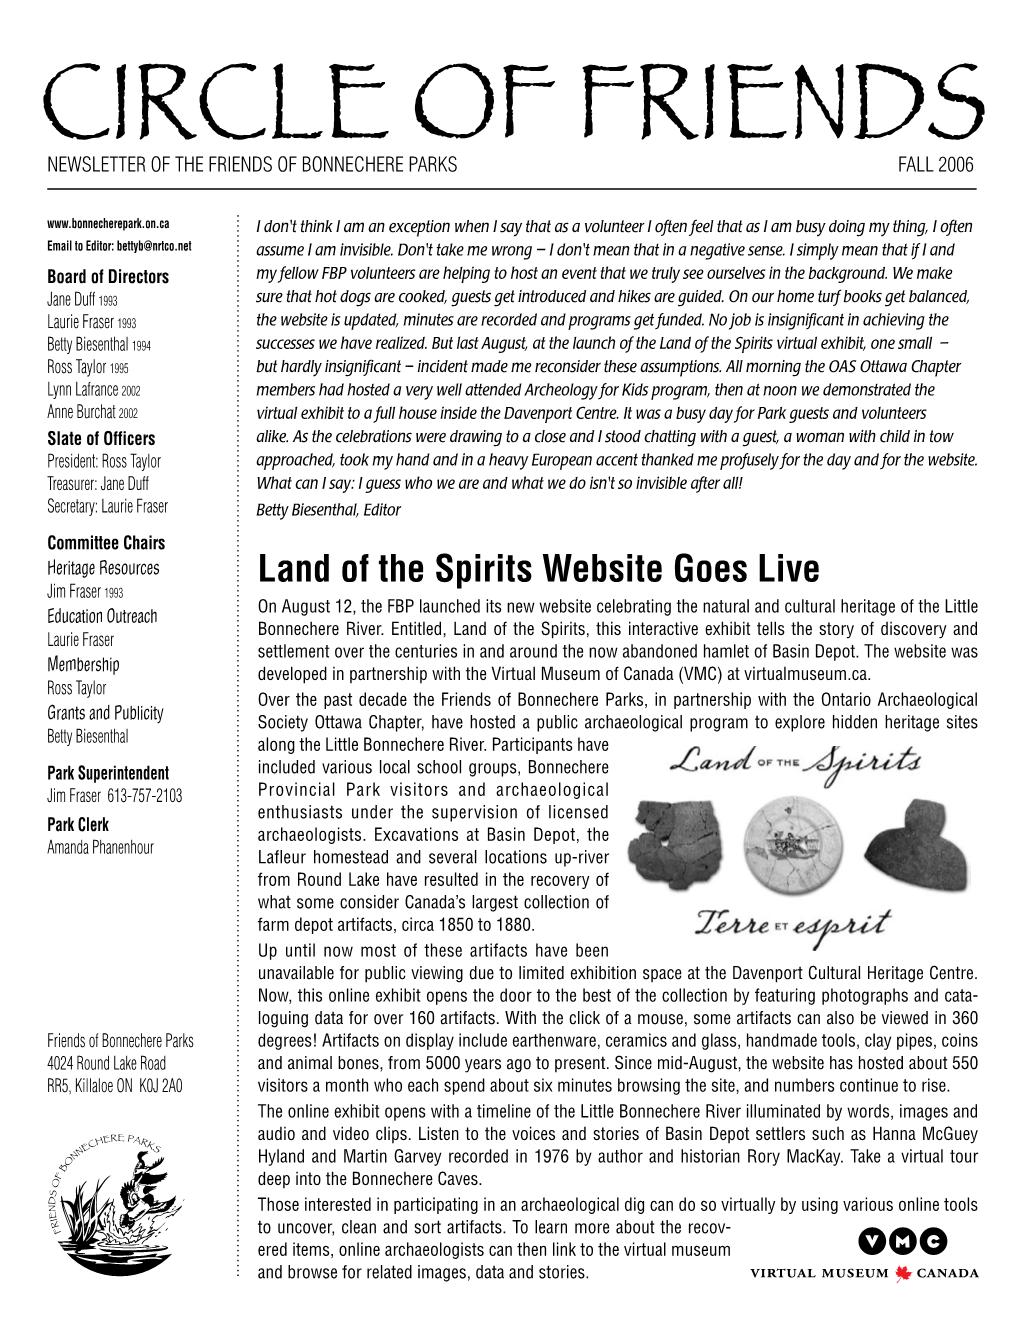 Land of the Spirits Website Goes Live